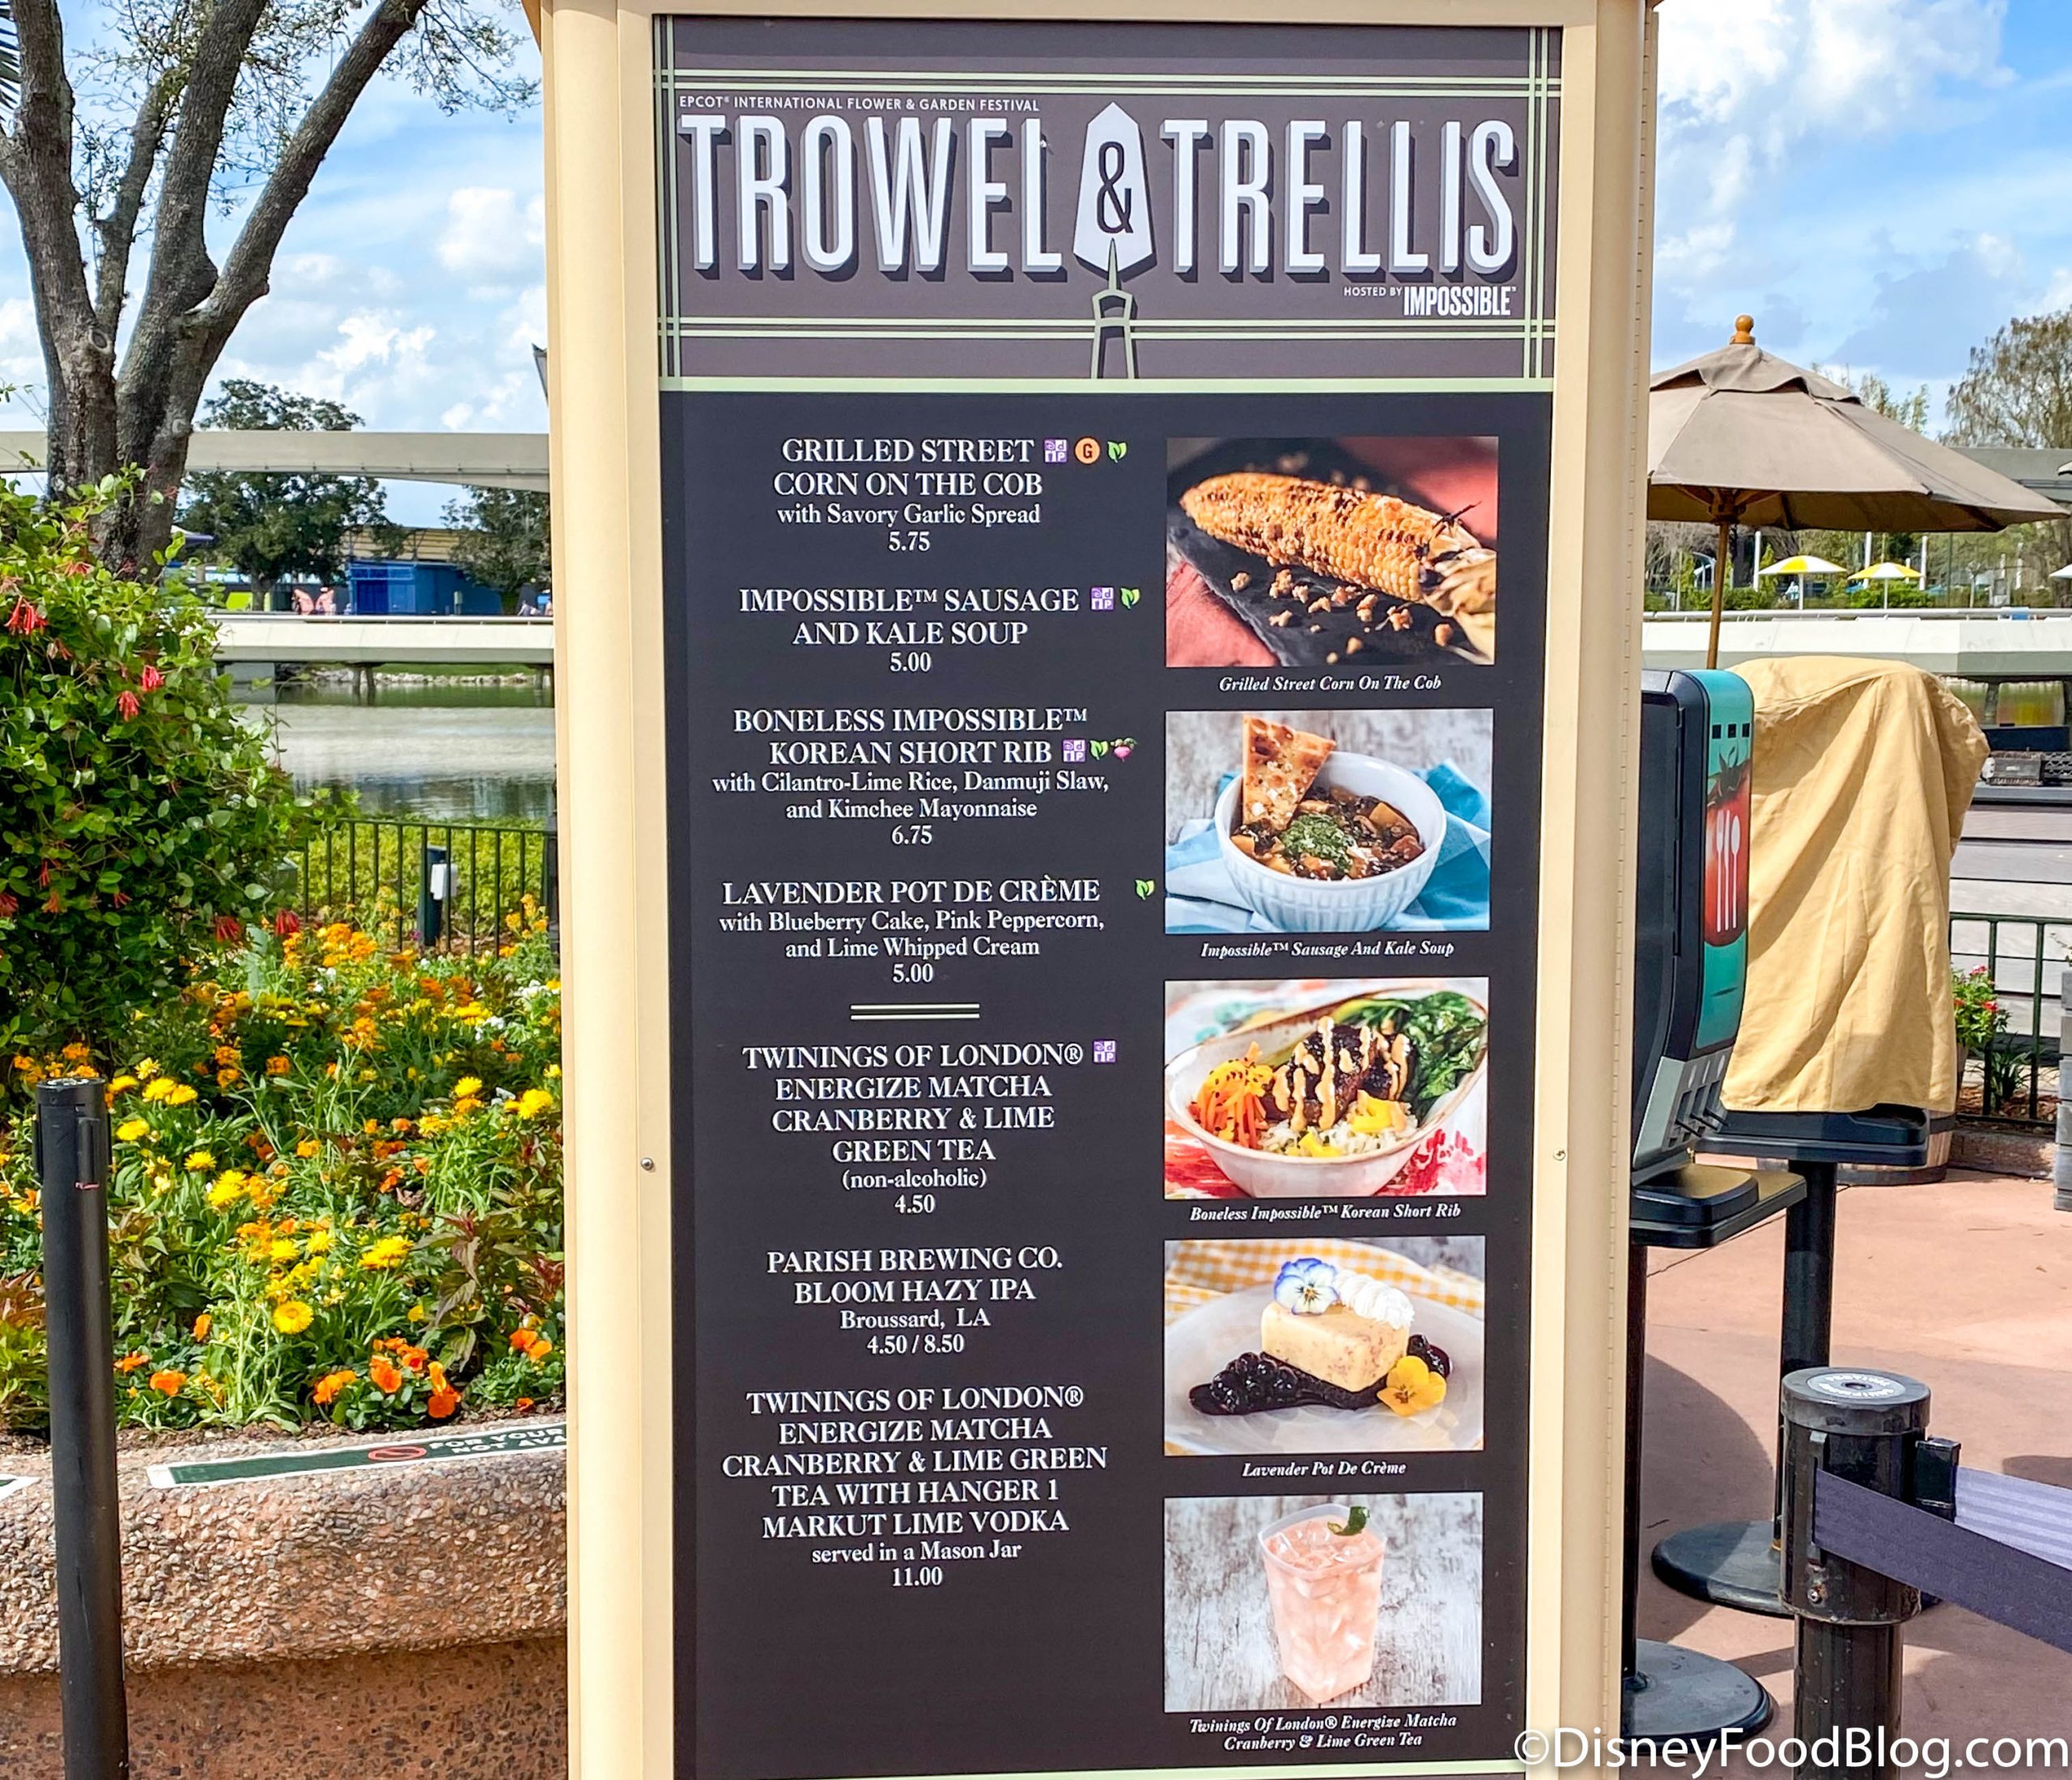 2021 EPCOT Flower and Garden Festival: Trowel and Trellis ...